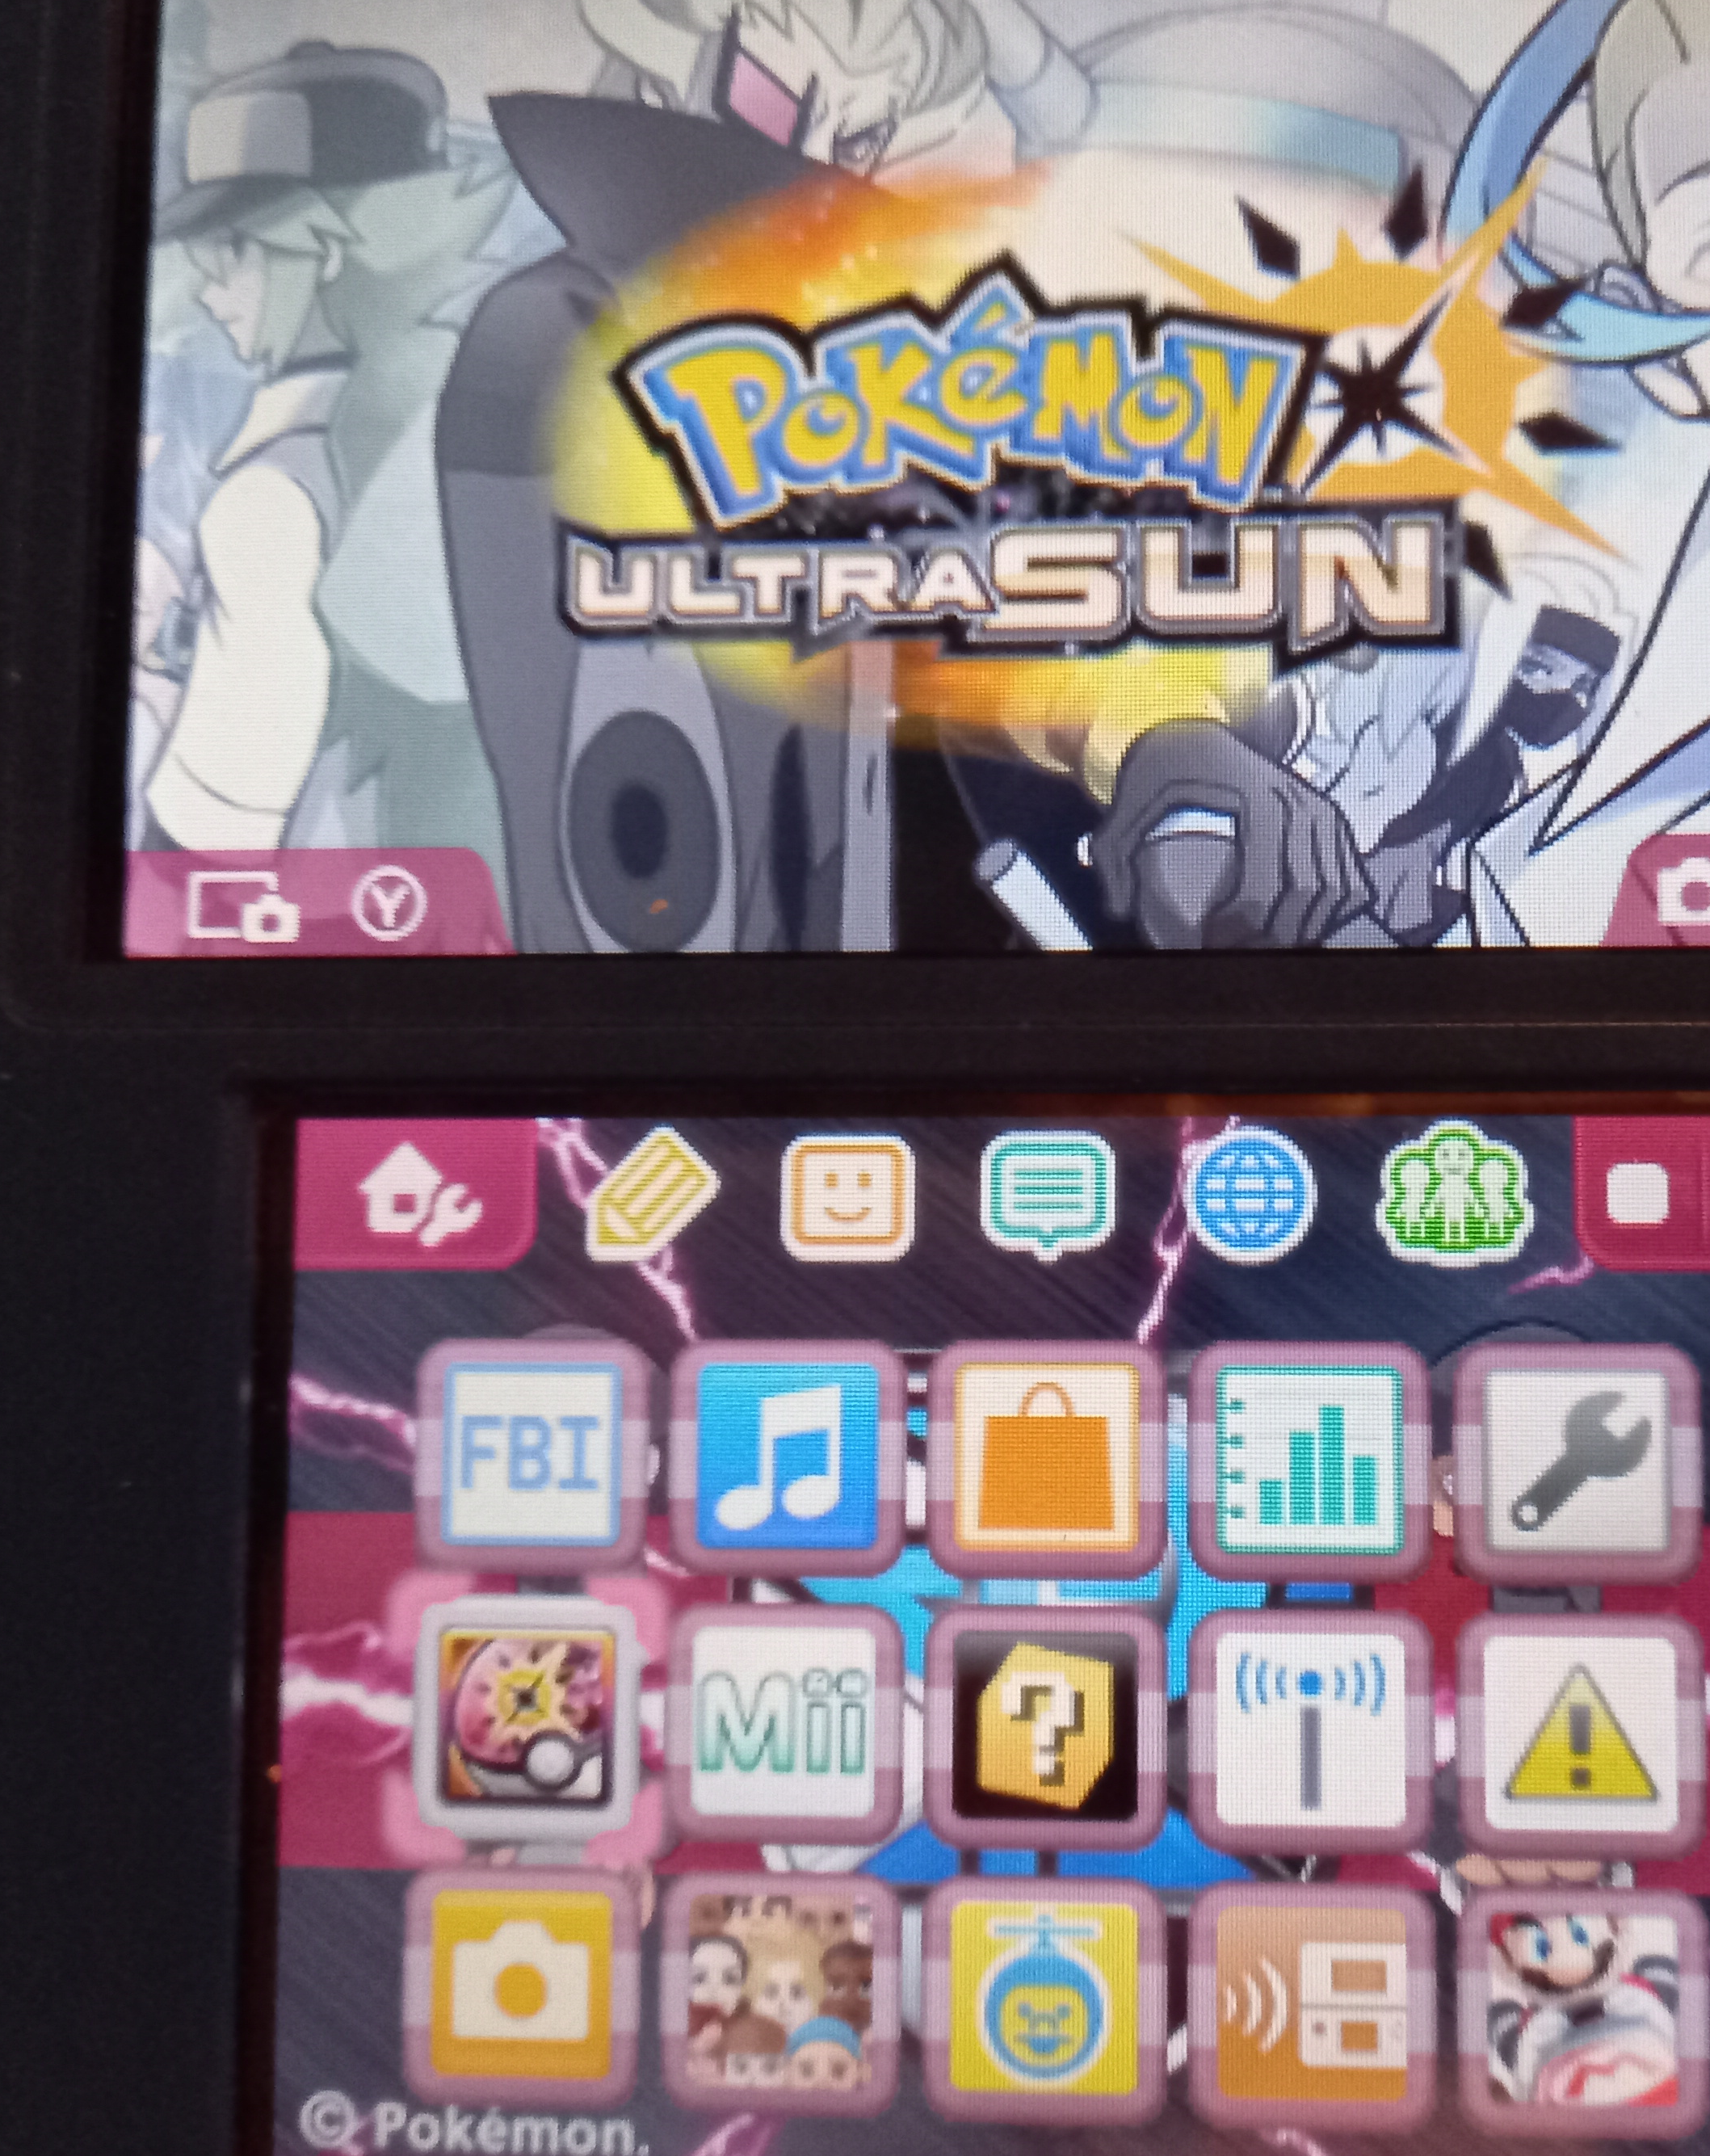 Error pokemon Ultra Sun game - Systems, Flashcards, and Emulation